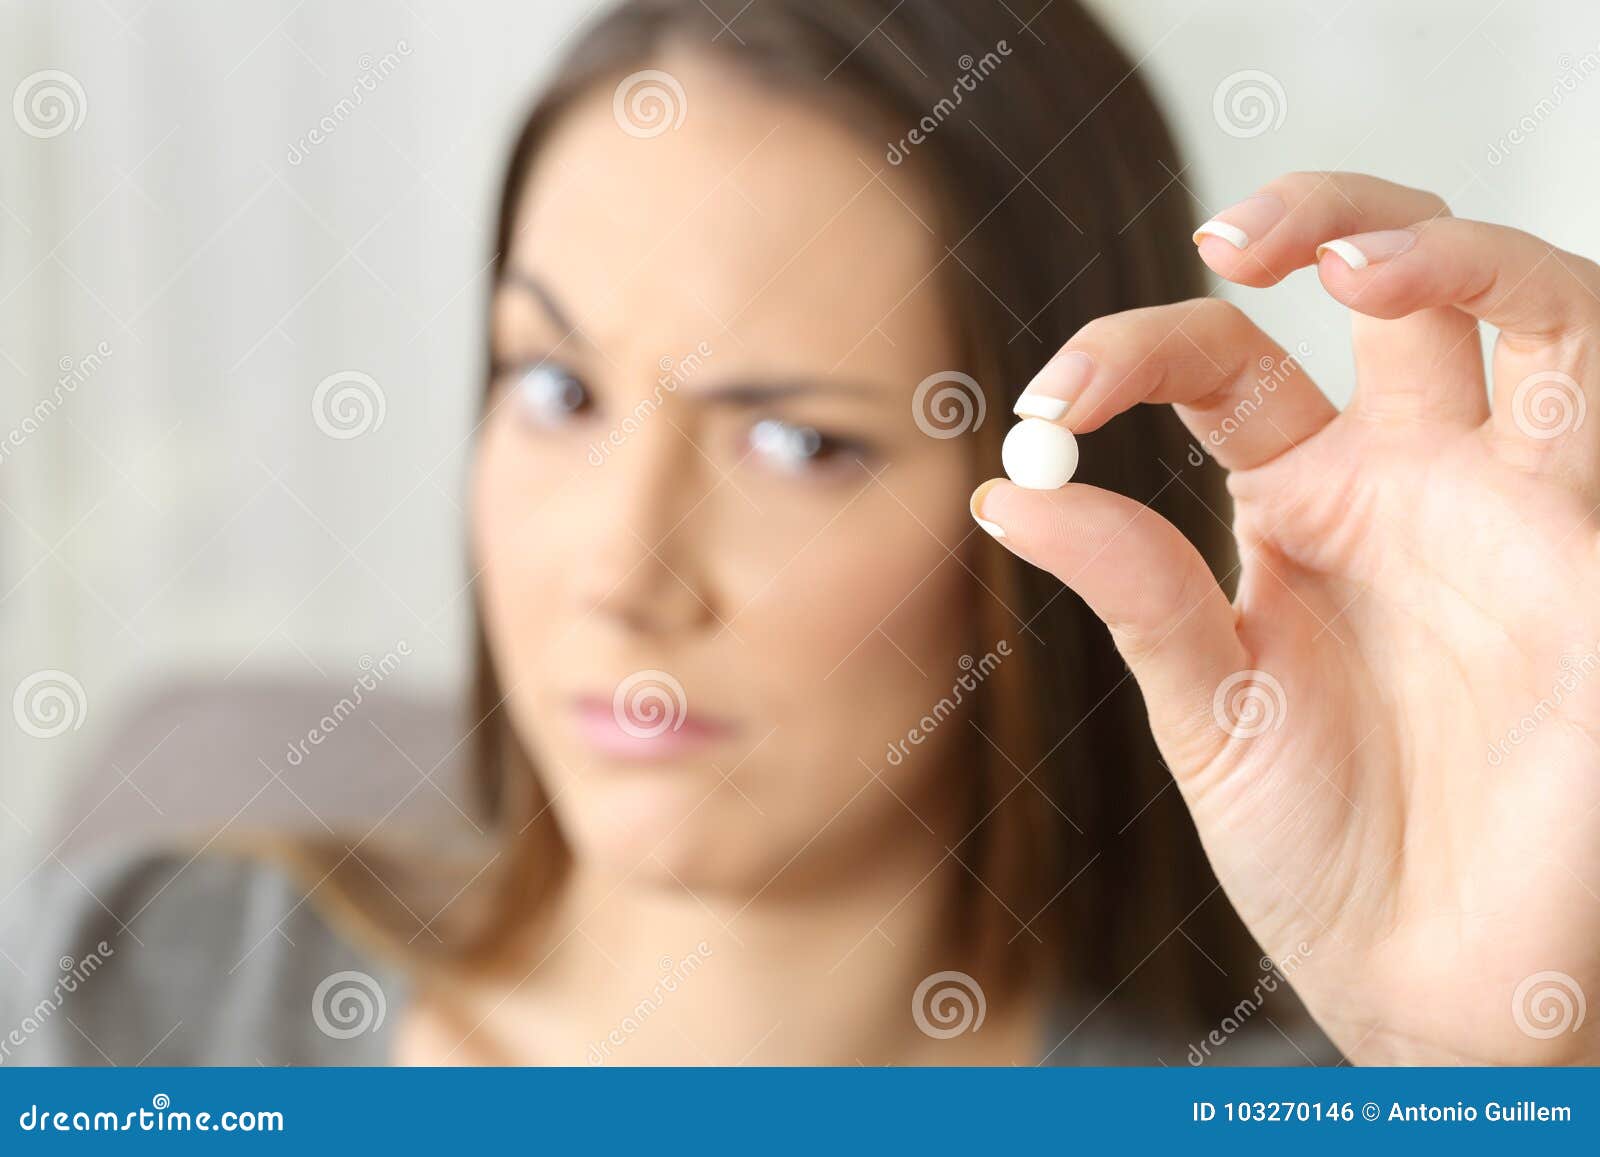 suspicious woman looking at a pill